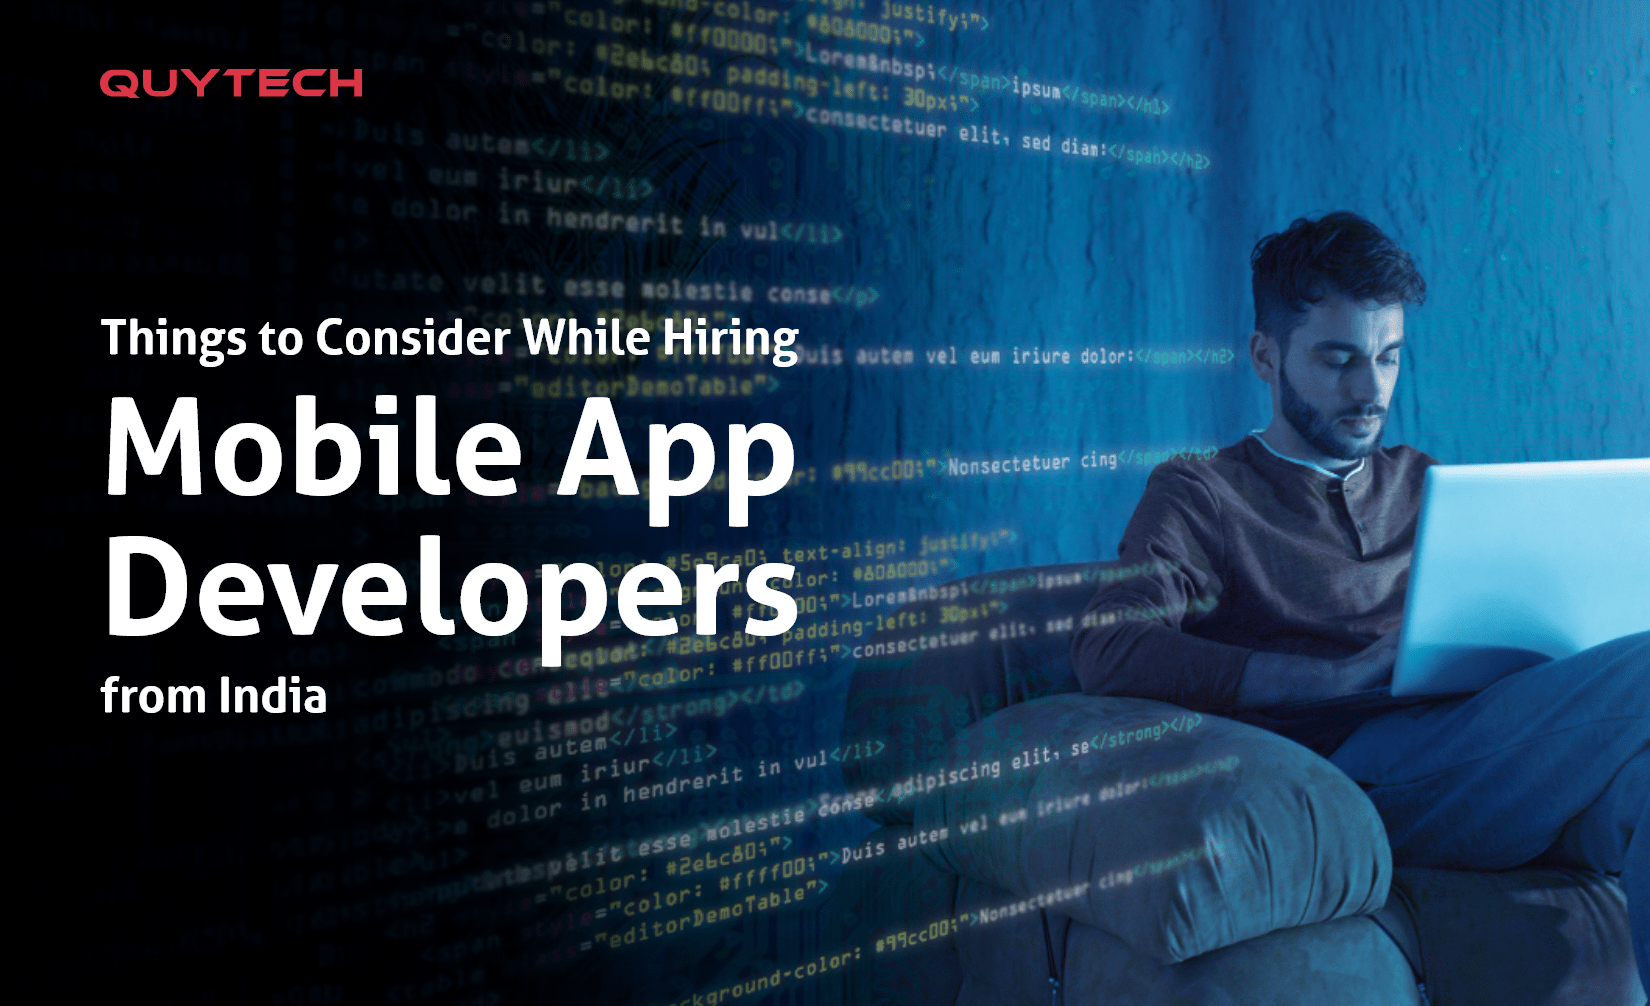 Things to Consider While Hiring Mobile App Developers from India